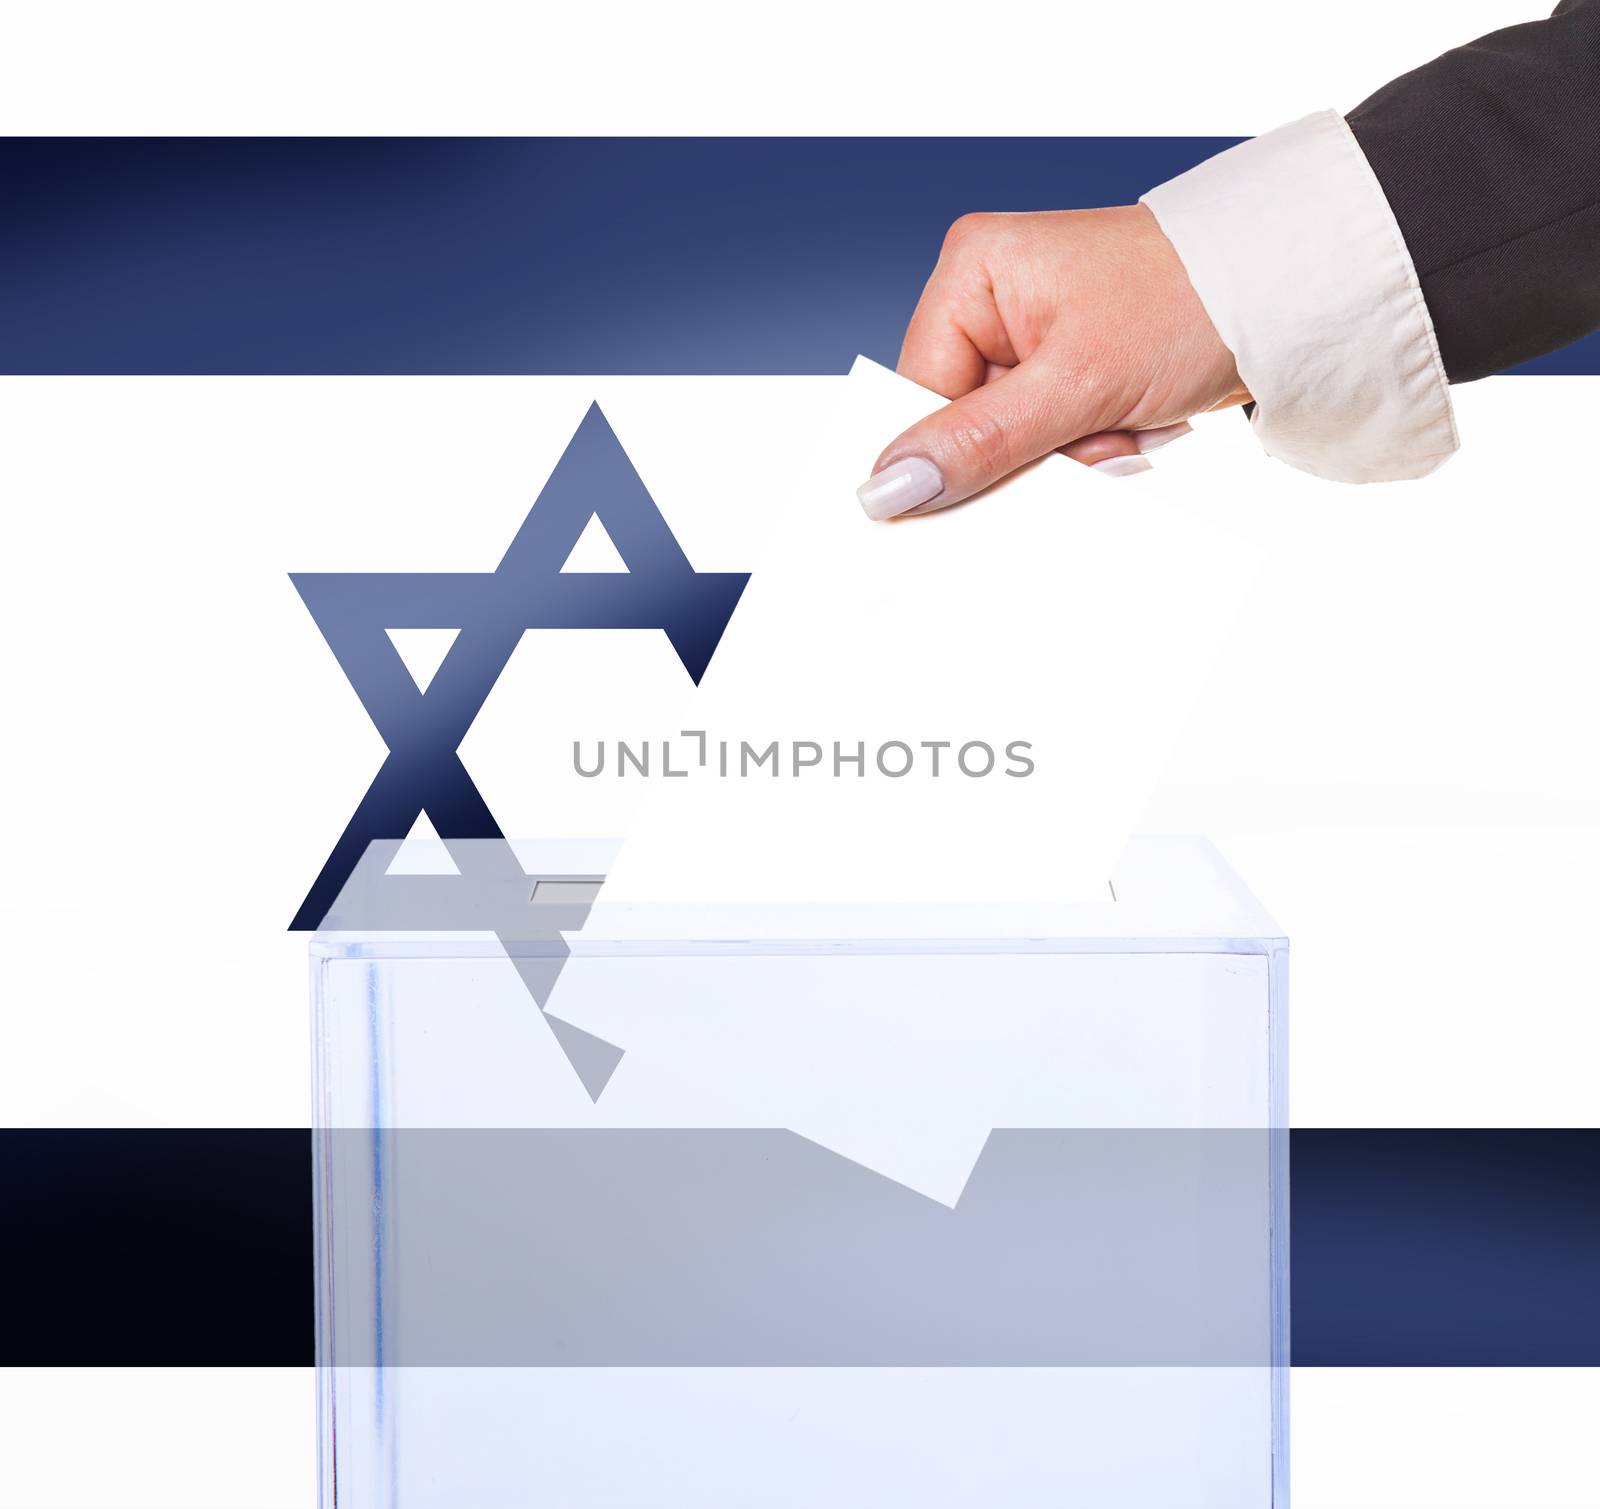 electoral vote by ballot, under the Israel flag